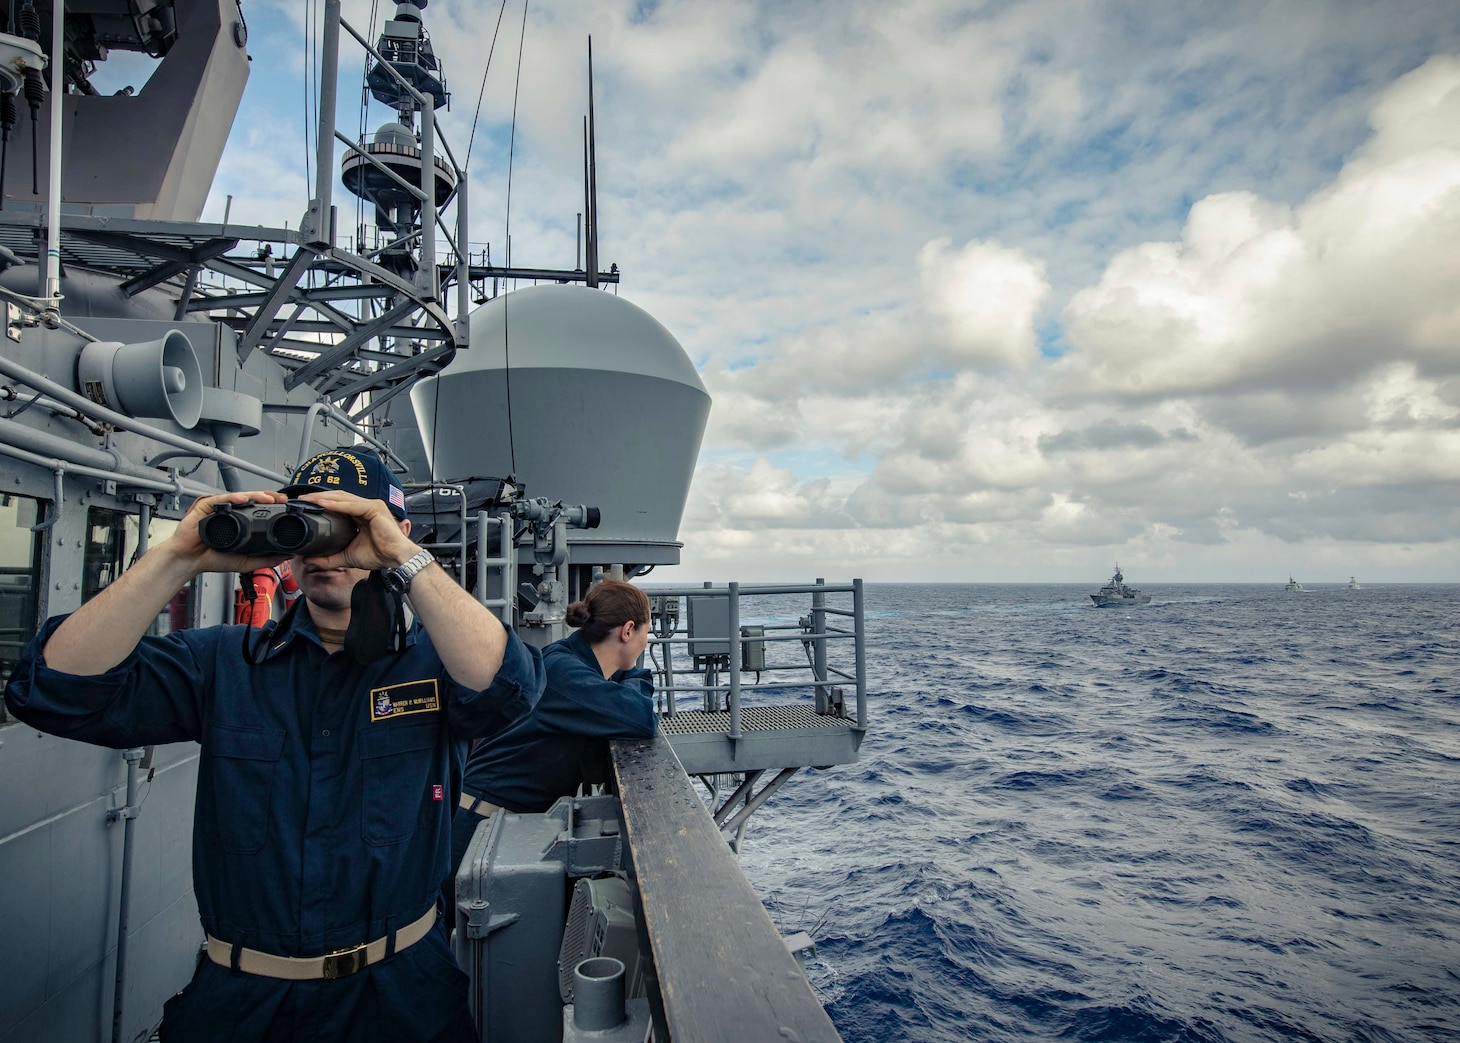 PHILIPPINE SEA (Nov. 21, 2019) Ens. Warren McWilliams looks forward as Lt. j.g. Katherine Lindman observes approaching ships on the bridge of the Ticonderoga-class guided-missile cruiser USS Chancellorsville (CG 62) during a group maneuvering exercise with ships from the Royal Australian Navy, Royal Canadian Navy, and Republic of Korea Navy as part of Pacific Vanguard 2019. Chancellorsville is forward-deployed to the U.S. 7th Fleet area of operations in support of security and stability in the Indo-Pacific region.